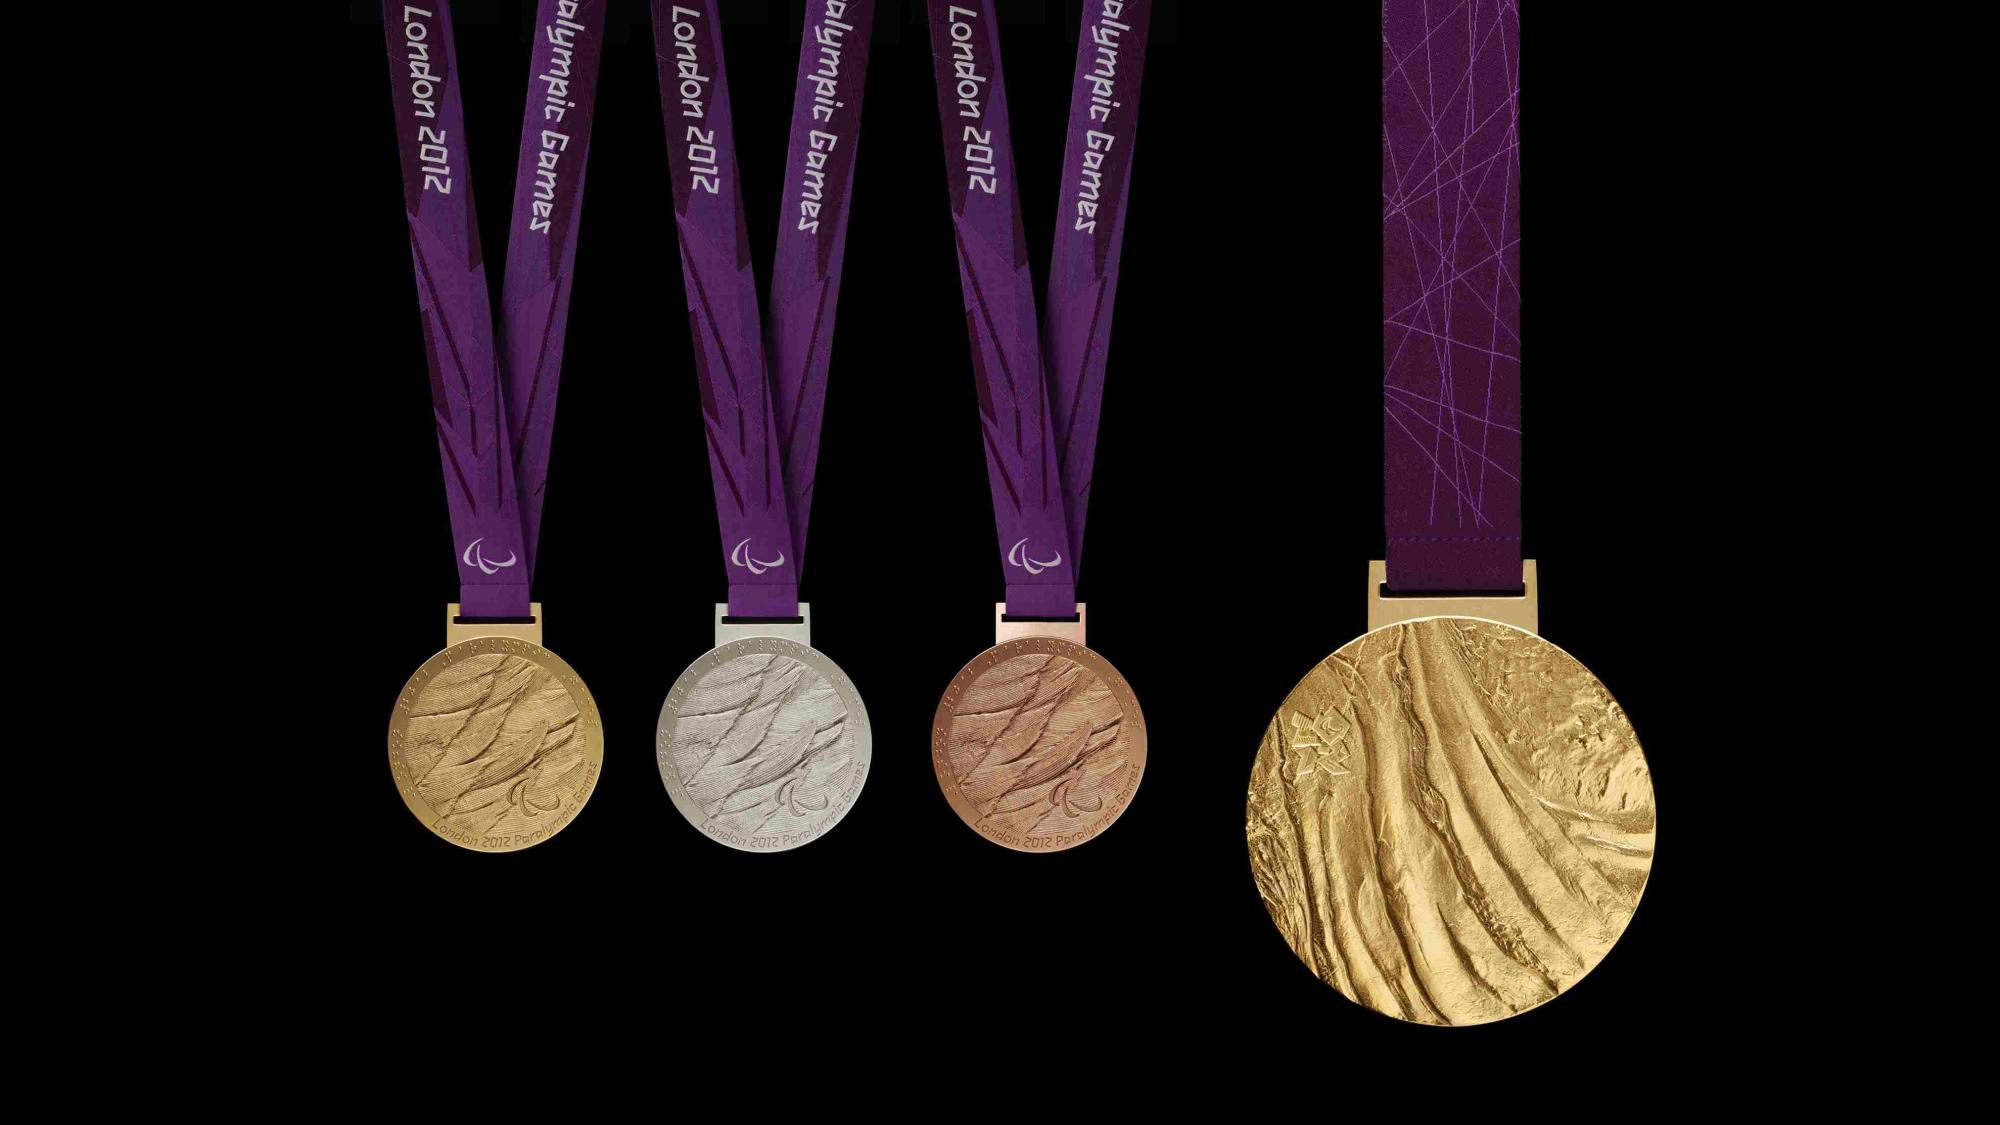 The medals of the London 2012 Paralympic Games